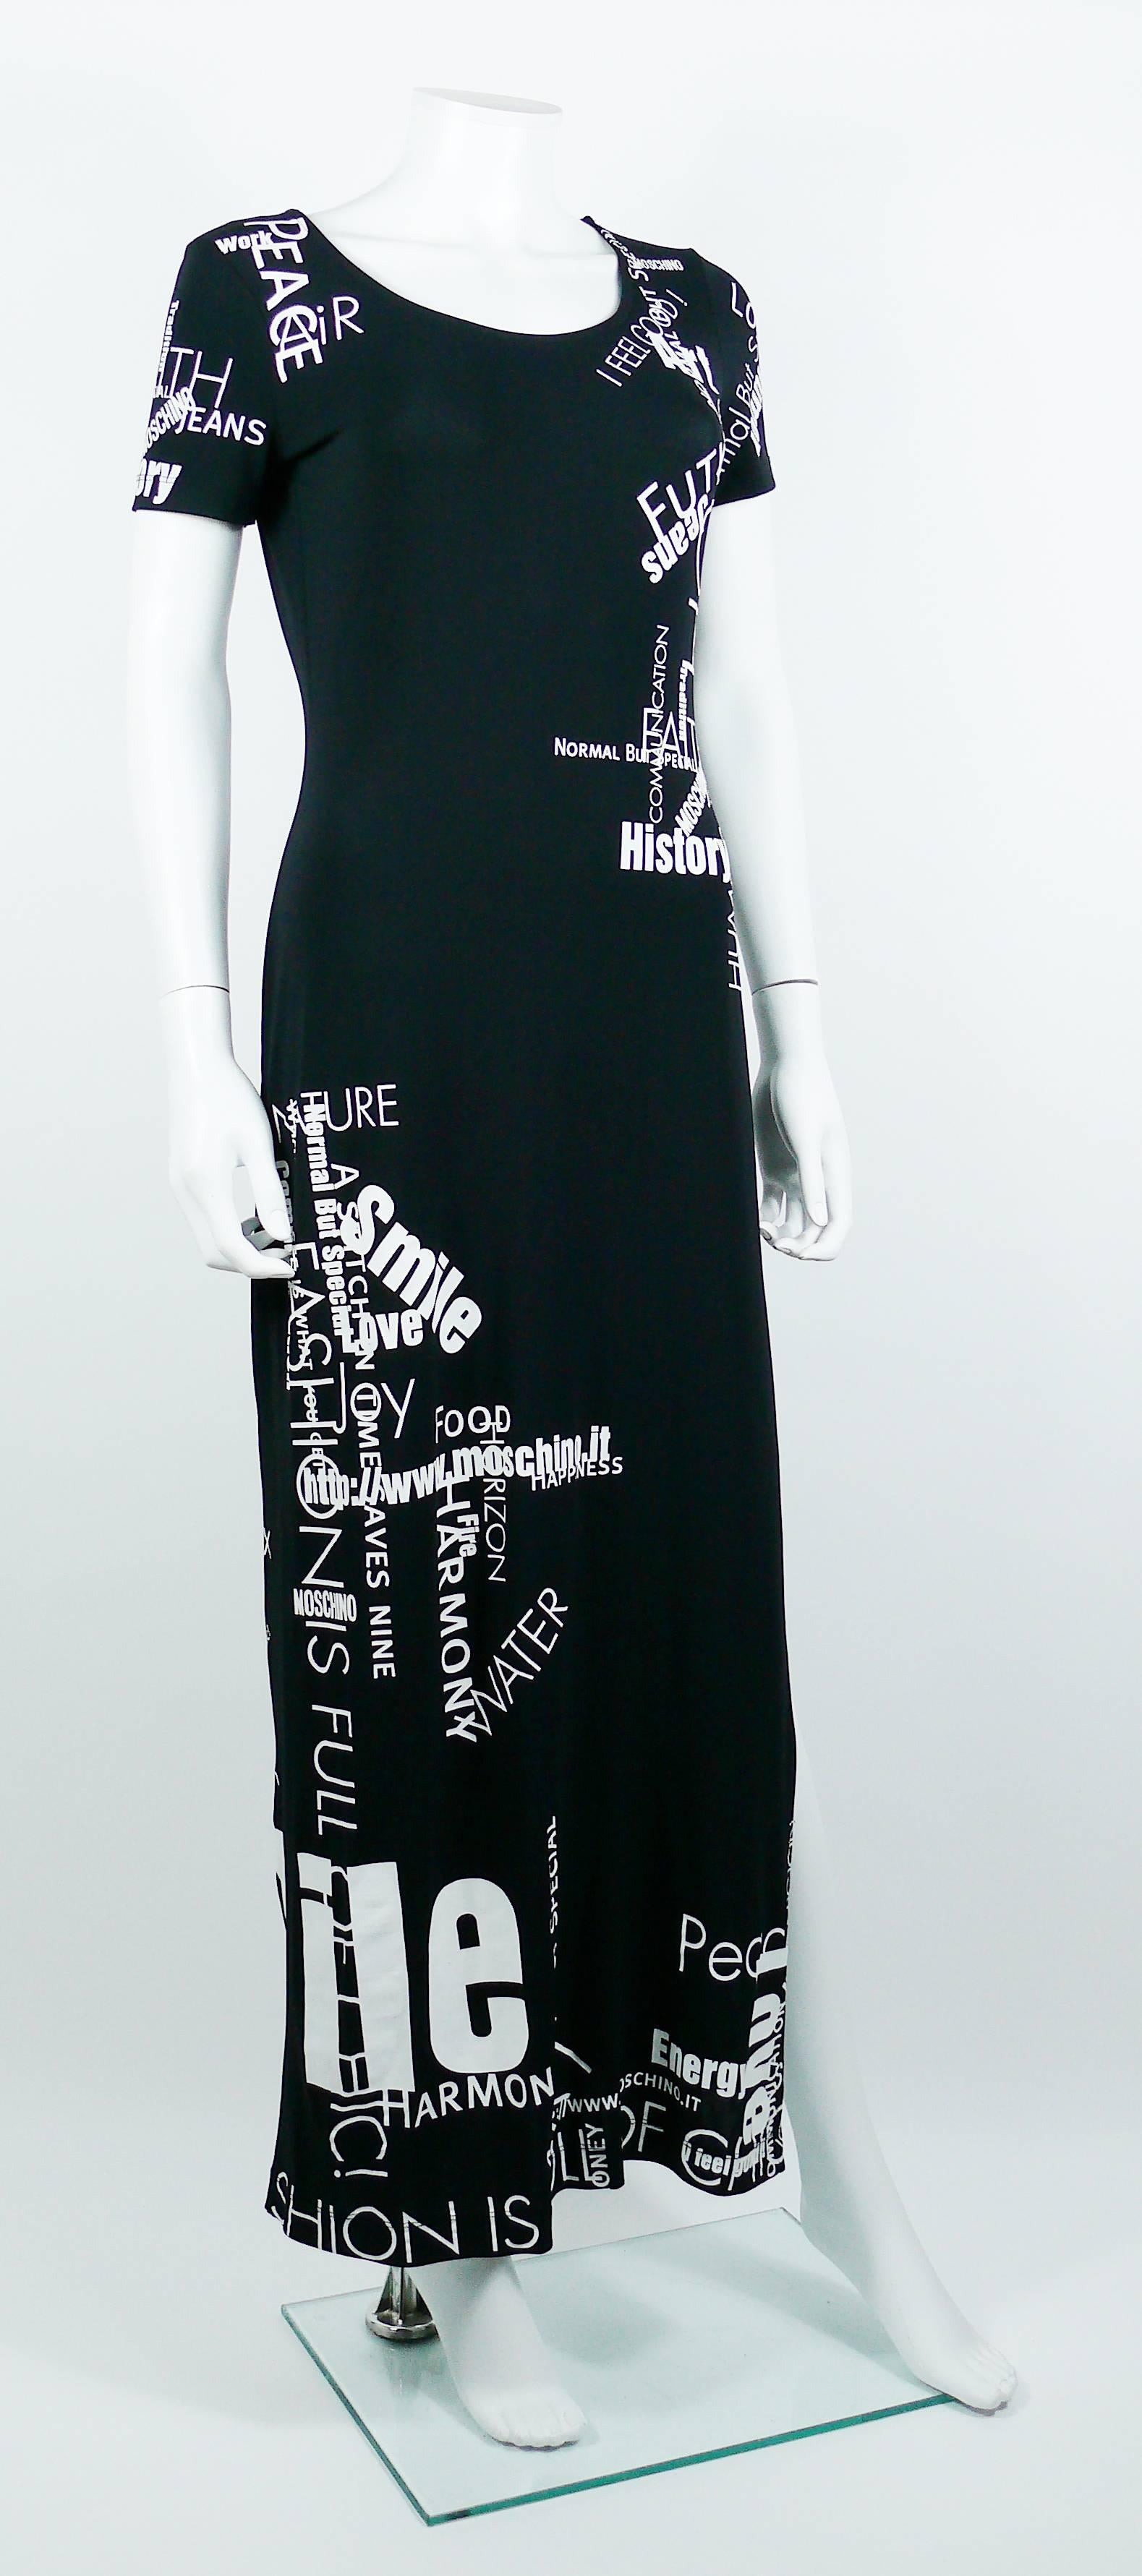 MOSCHINO vintage black maxi dress with all over text.

This dress features :
- Black hugging synthetic with spandex material.
- White print lettering with words 